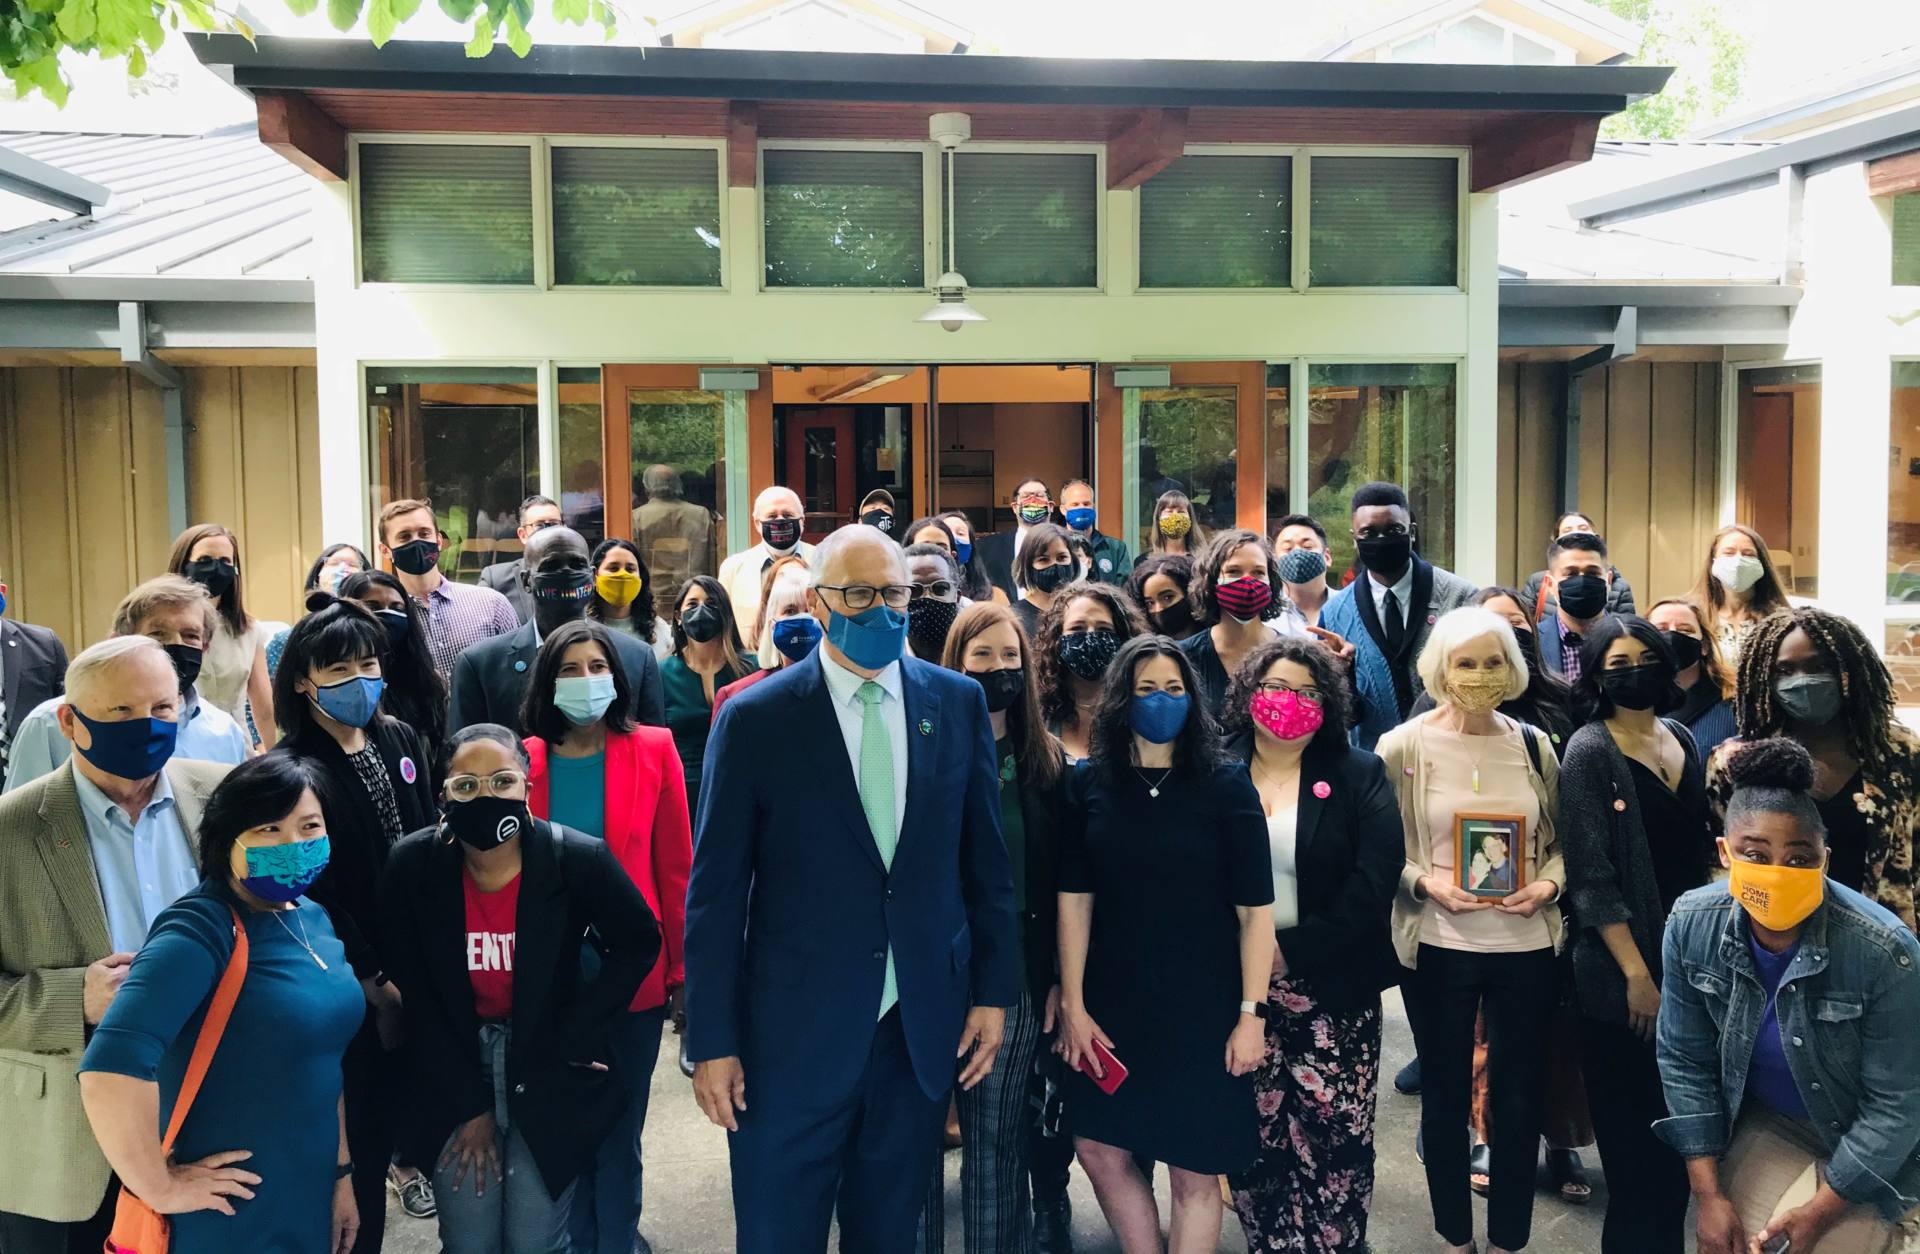 Governor Inslee standing with a group of advocates and legislators. Everyone is wearing facial covers.